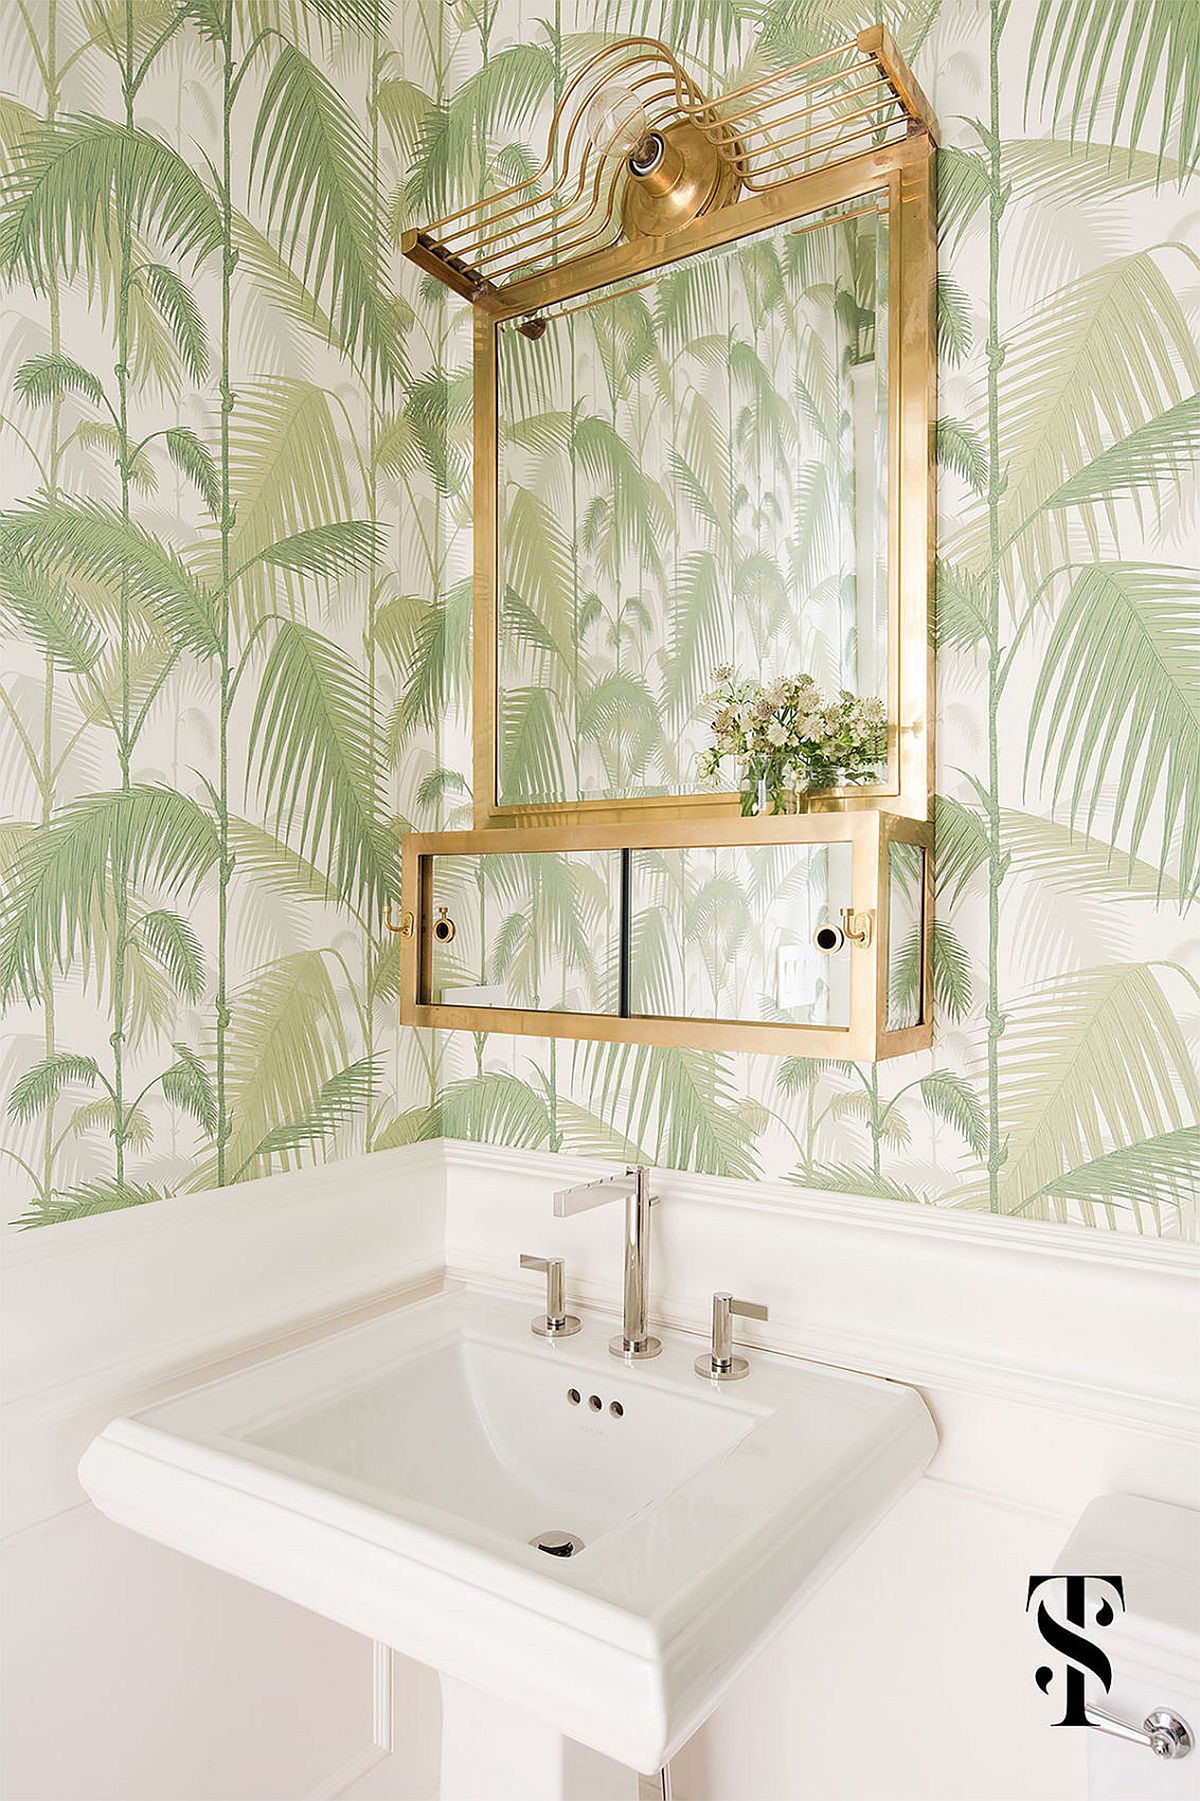 Tropical-style-powder-room-idea-with-hot-metallic-accents